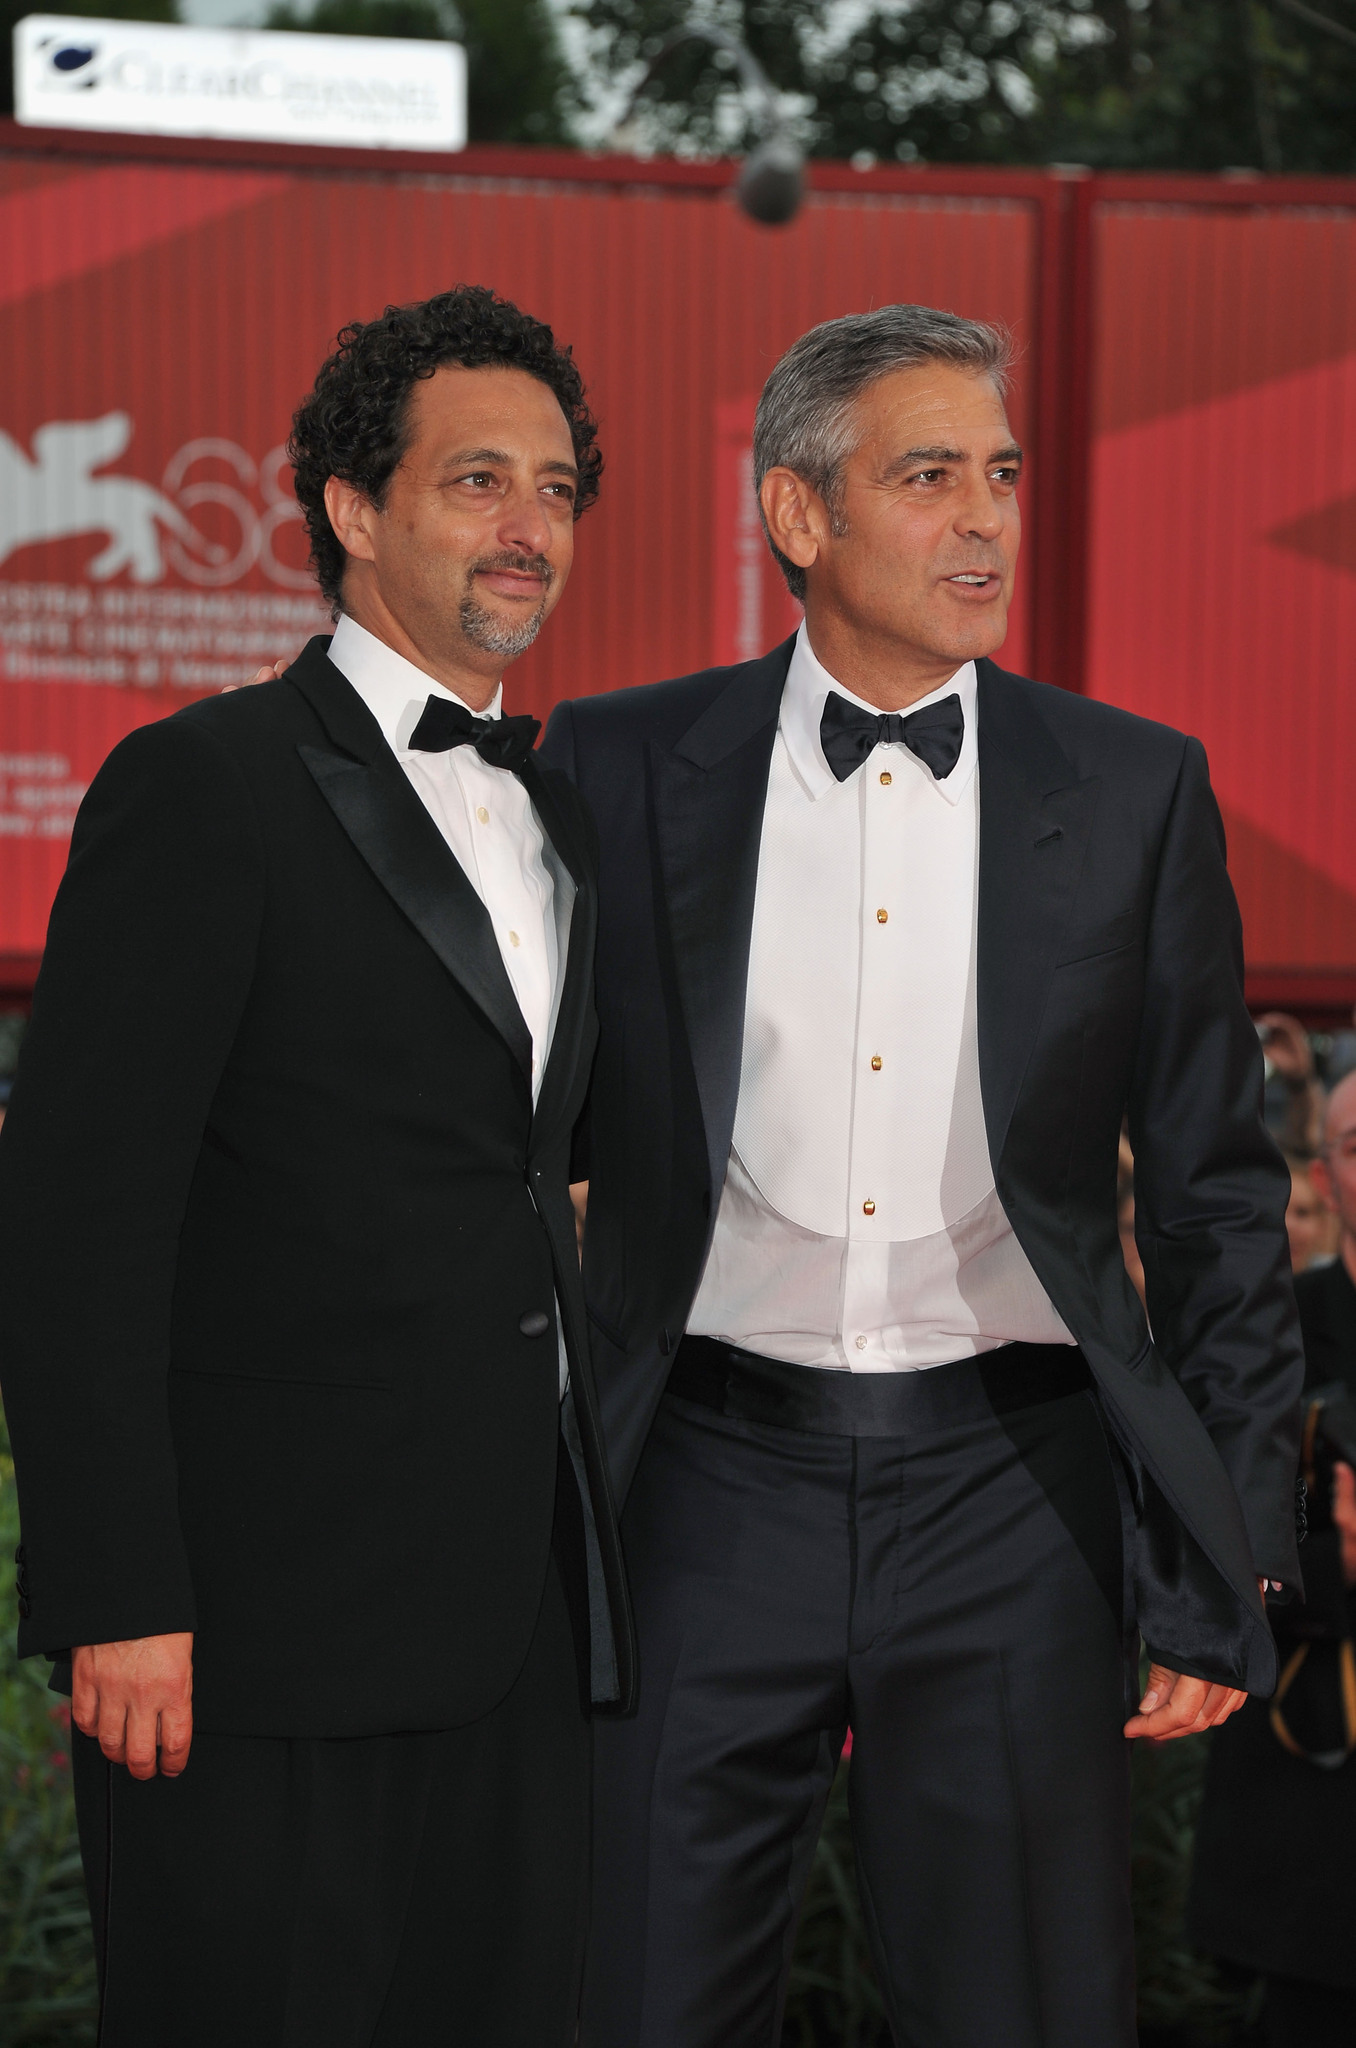 George Clooney and Grant Heslov at event of Purvini zaidimai (2011)